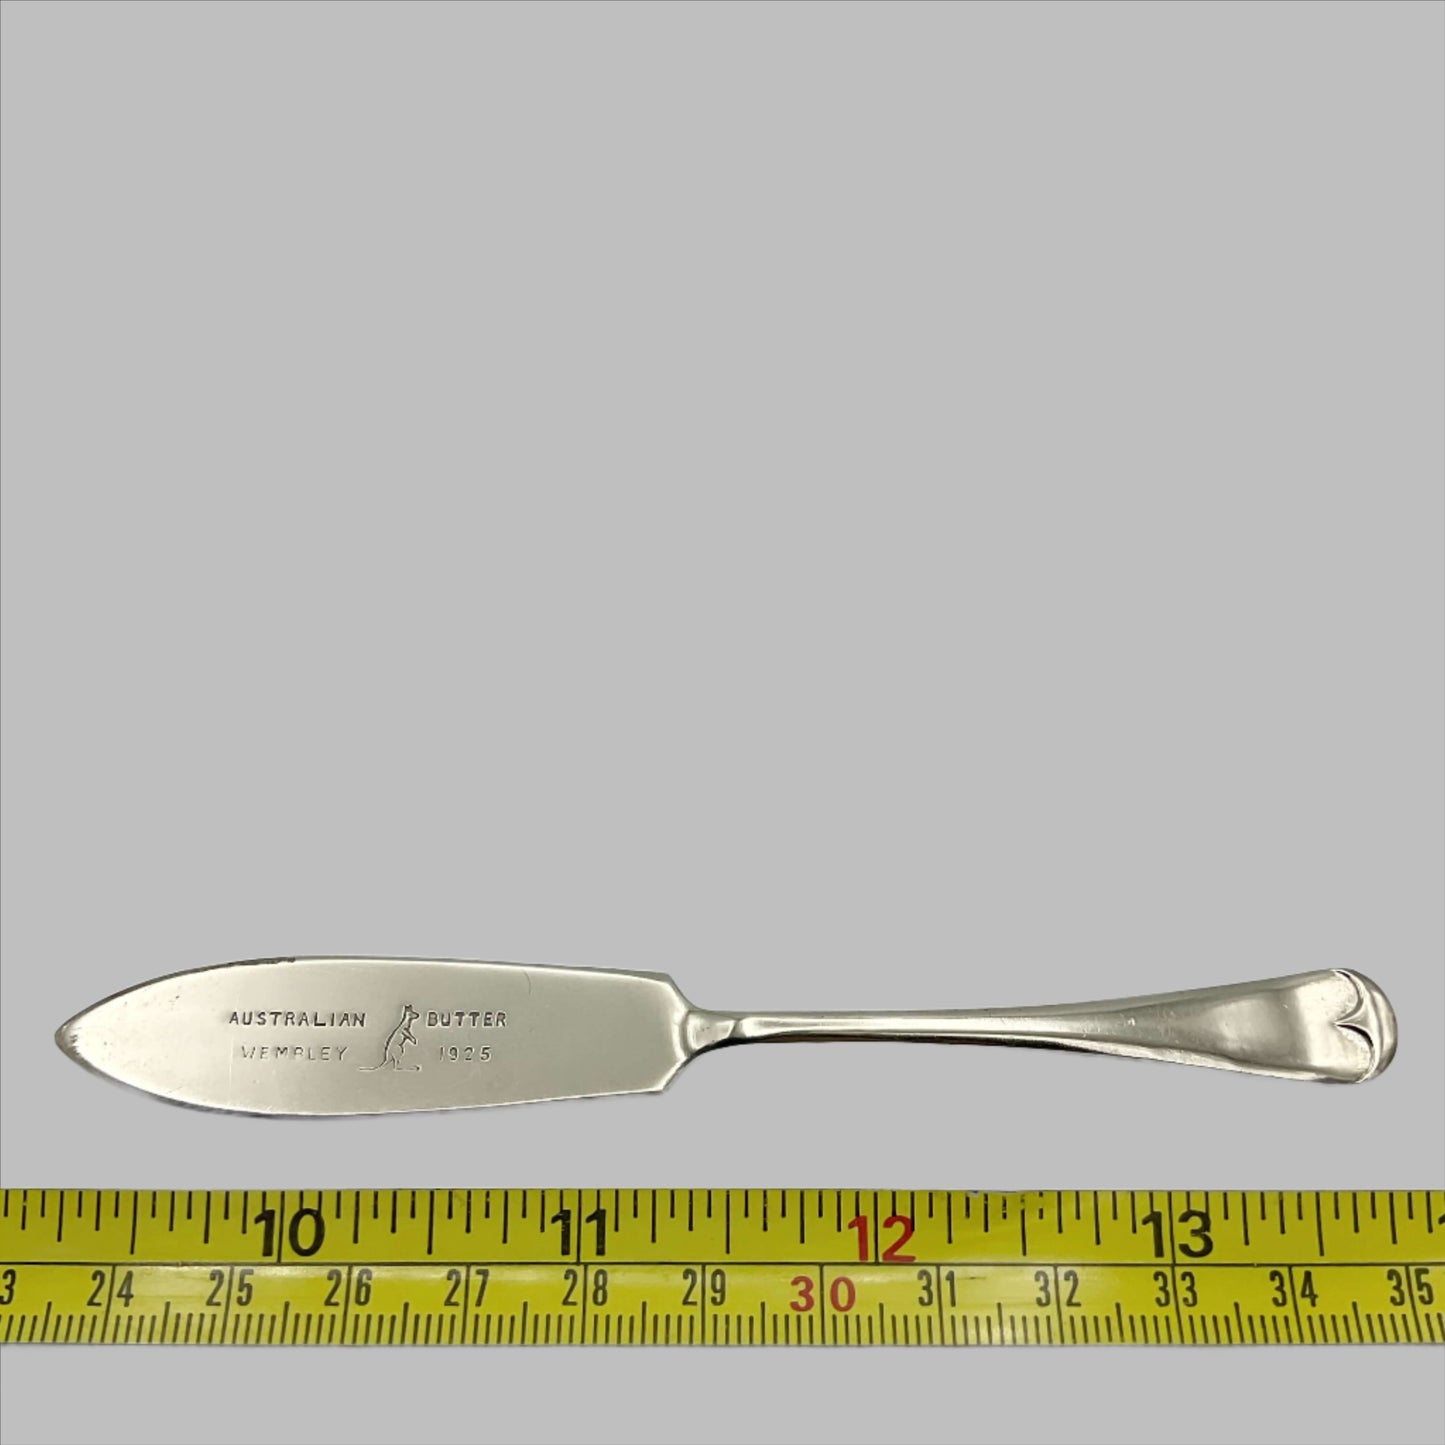 Silver plated butter knife with Australian Butter Wembley 1925 on the blade with a Kangaroo emblem next to a tape measure